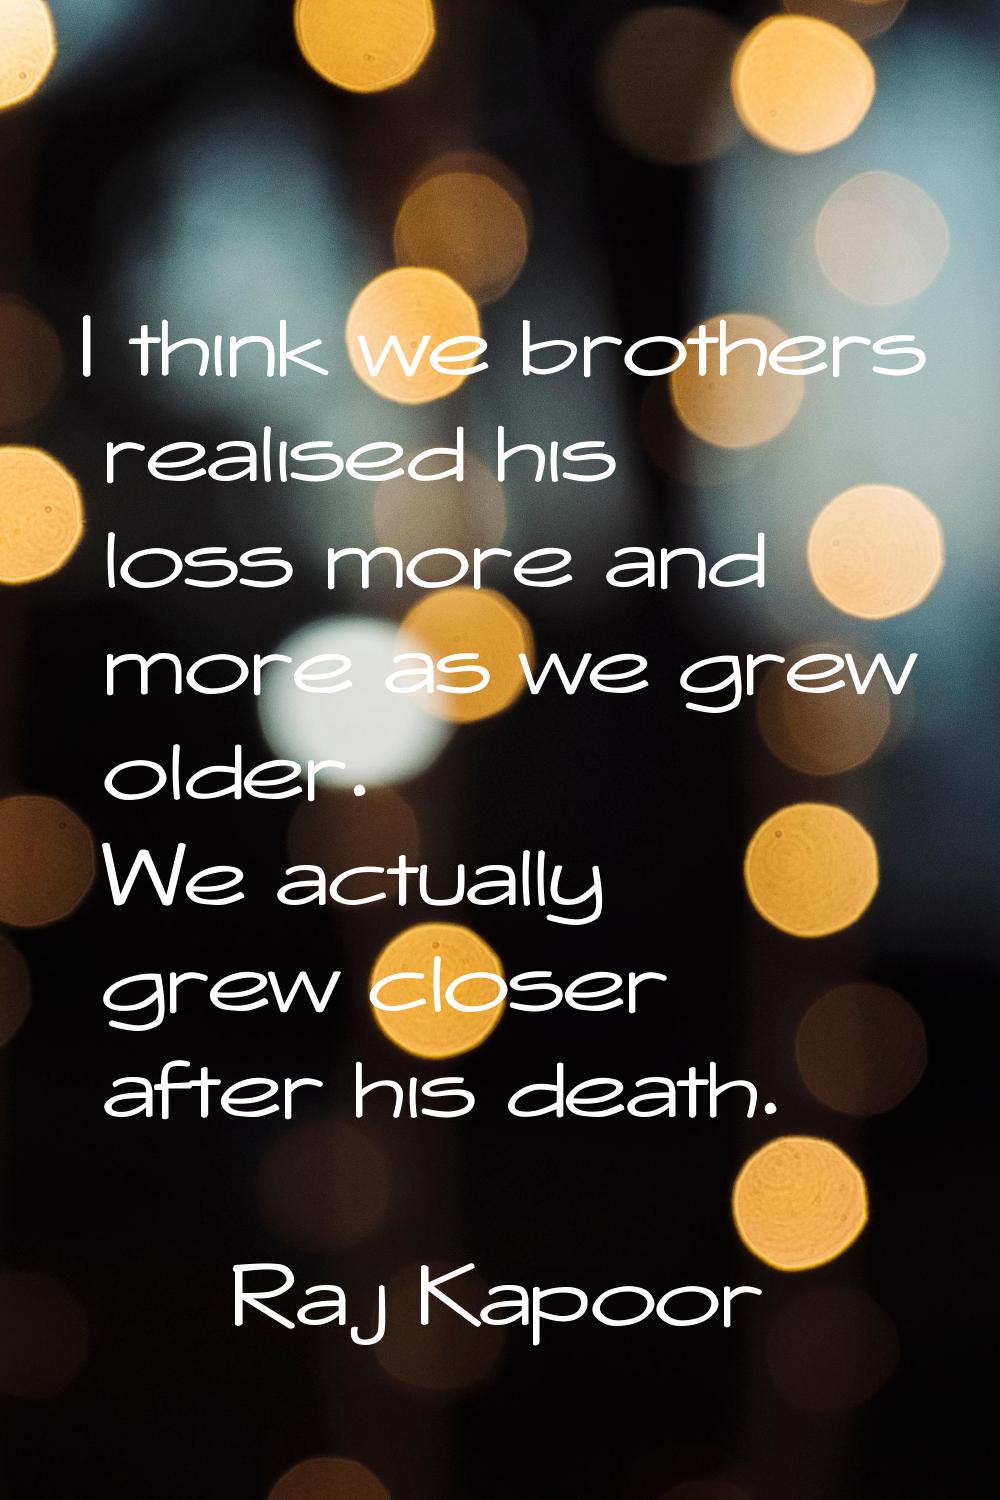 I think we brothers realised his loss more and more as we grew older. We actually grew closer after